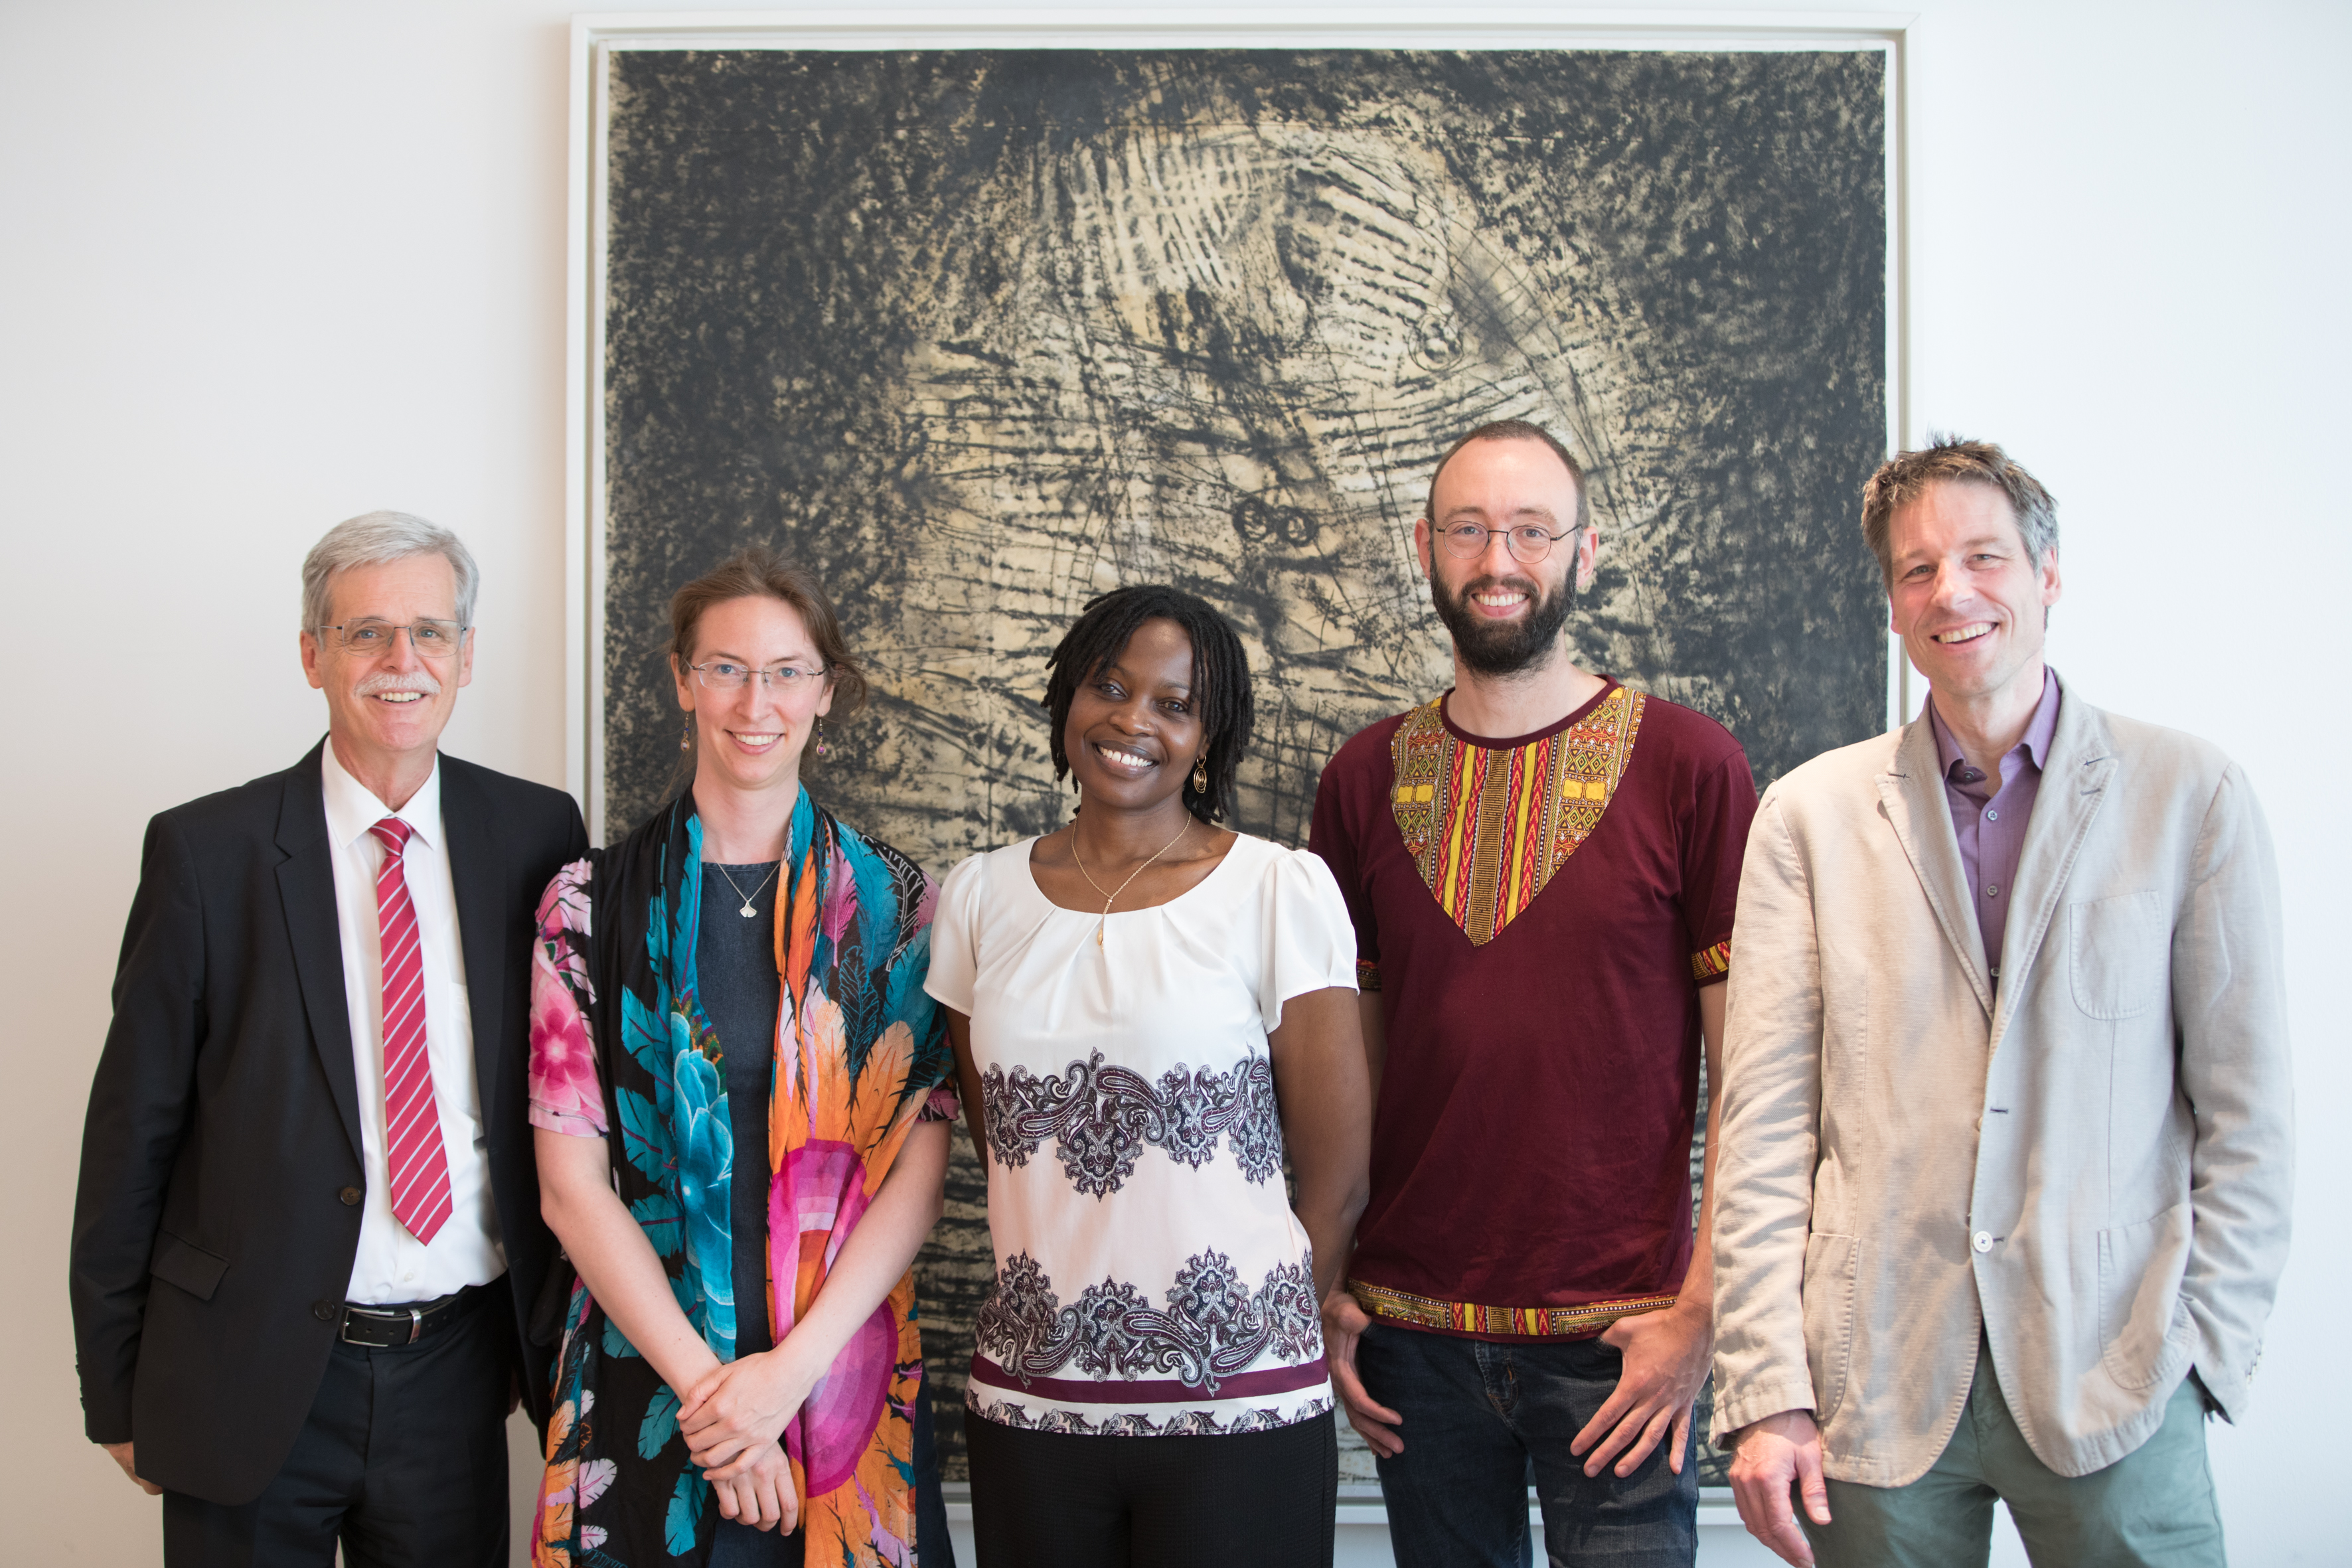 Group picture of a meeting between representatives of University of Tübingen and AIMS, from left to right: Bernd Engler, Franca Hoffmann, Audrey Namdiero-Walsh, Philipp Berens, Tilman Gocht. Photo Credit: F. Albrecht/University of Tübingen